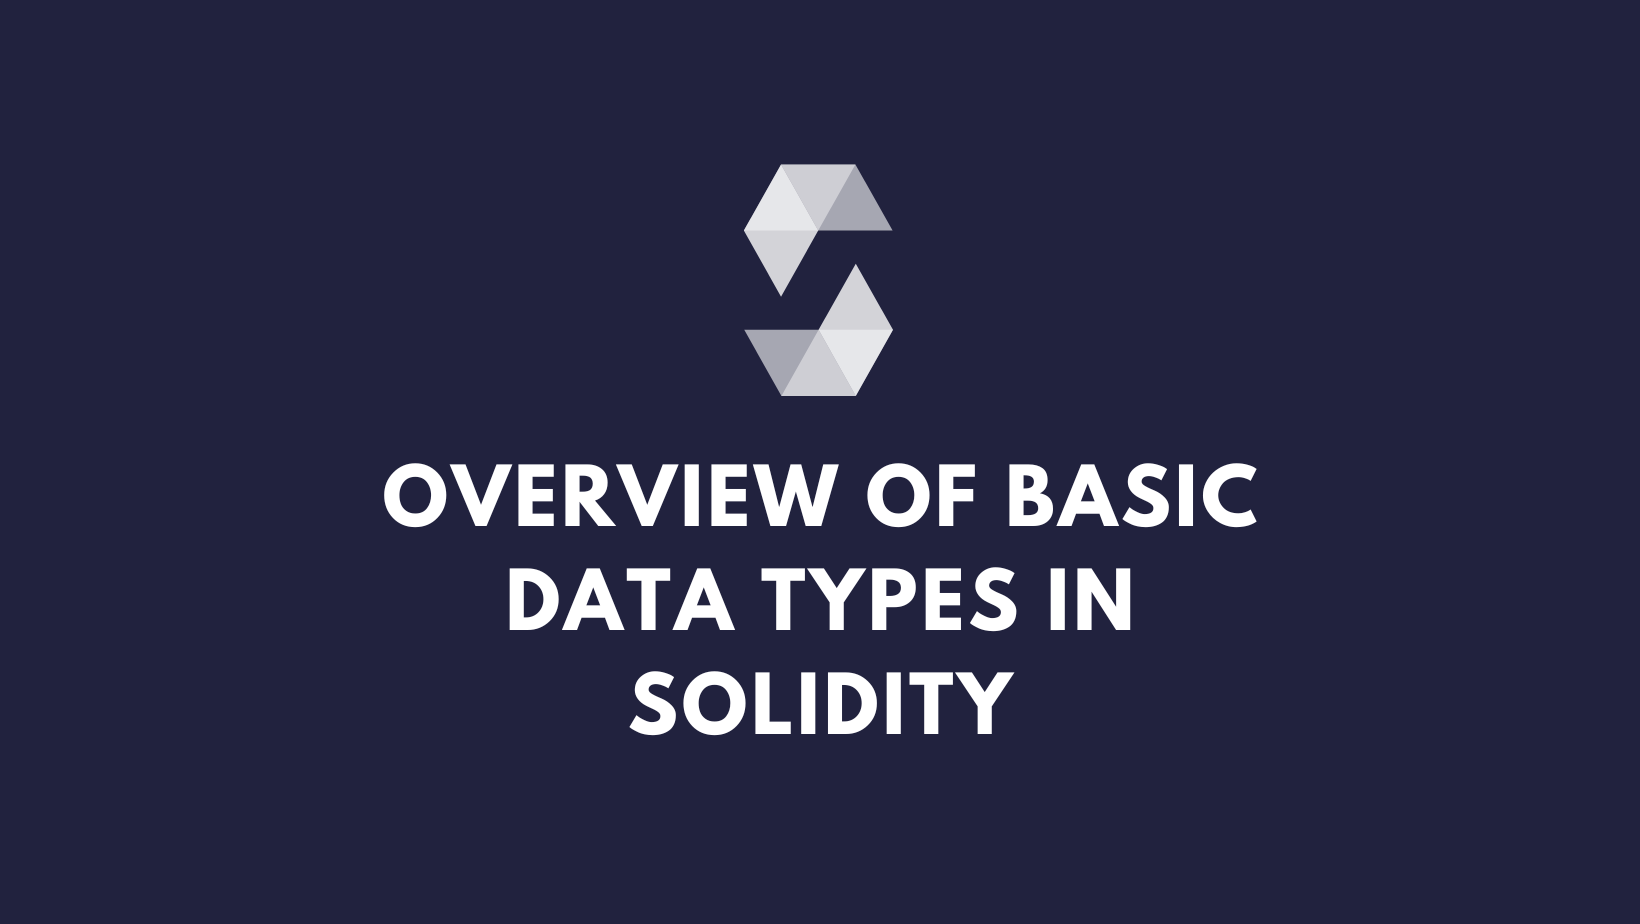 Basic overview of data types in solidity